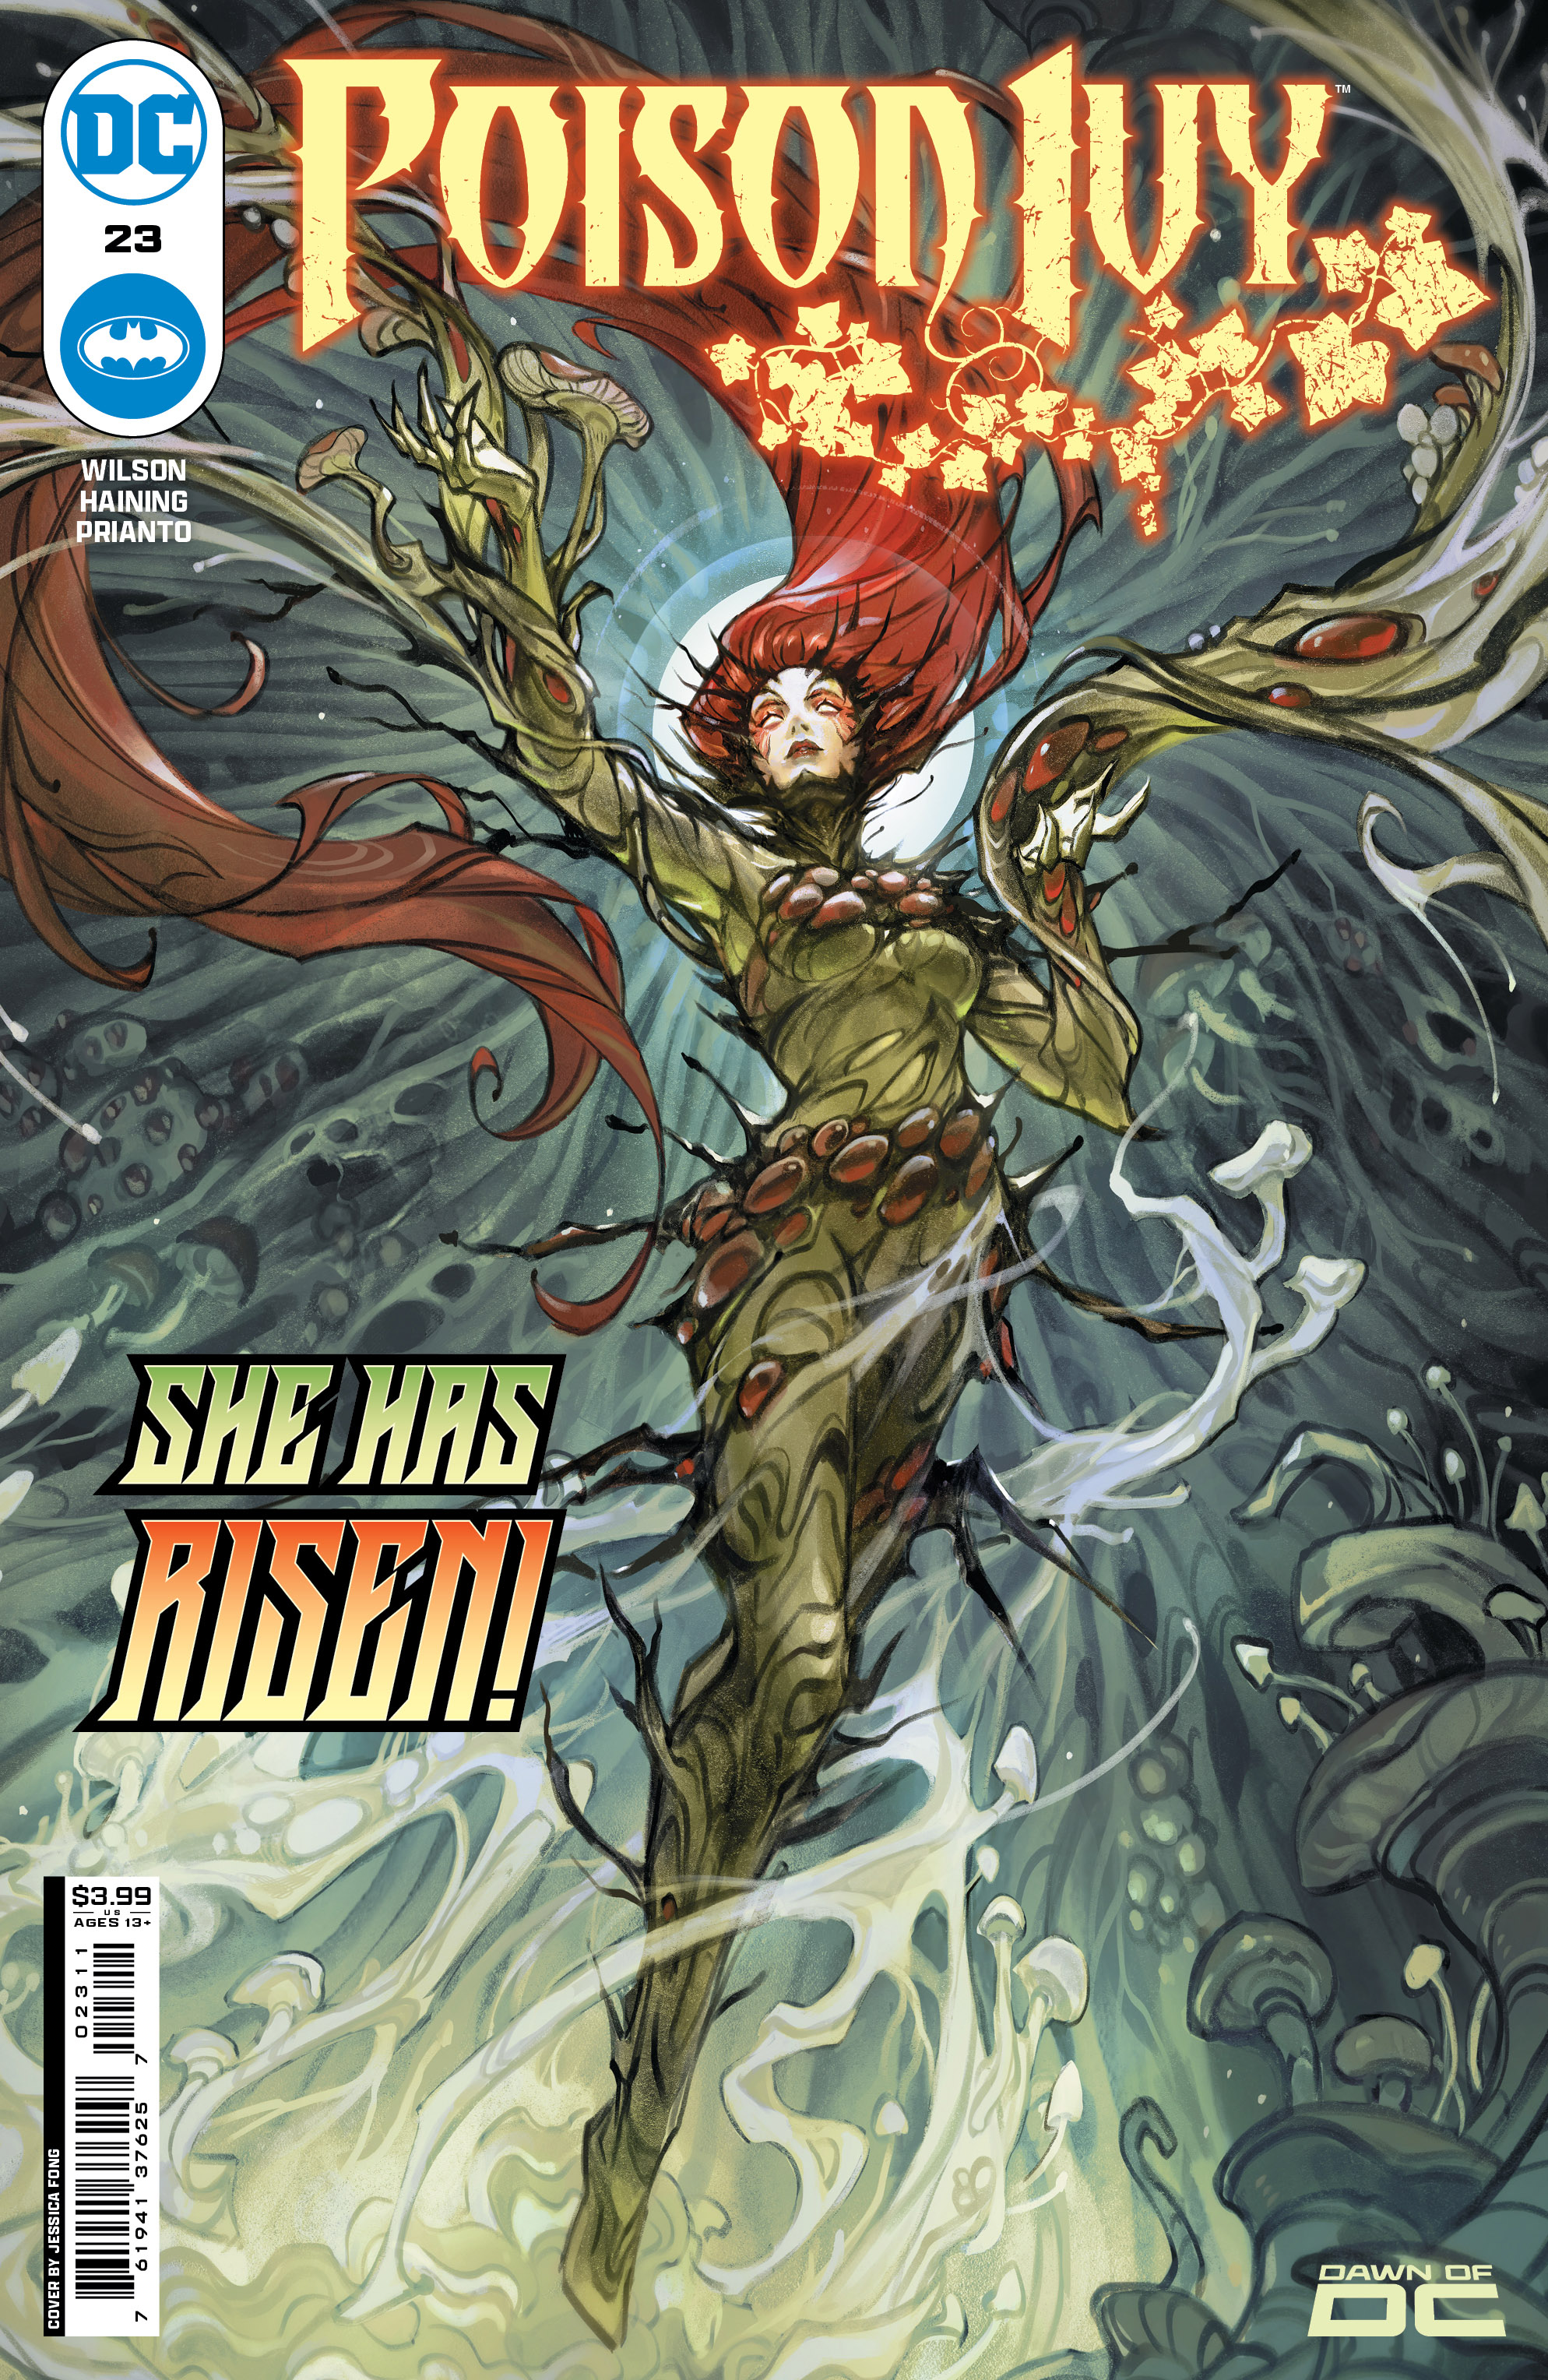 Poison Ivy #23 Cover A Jessica Fong